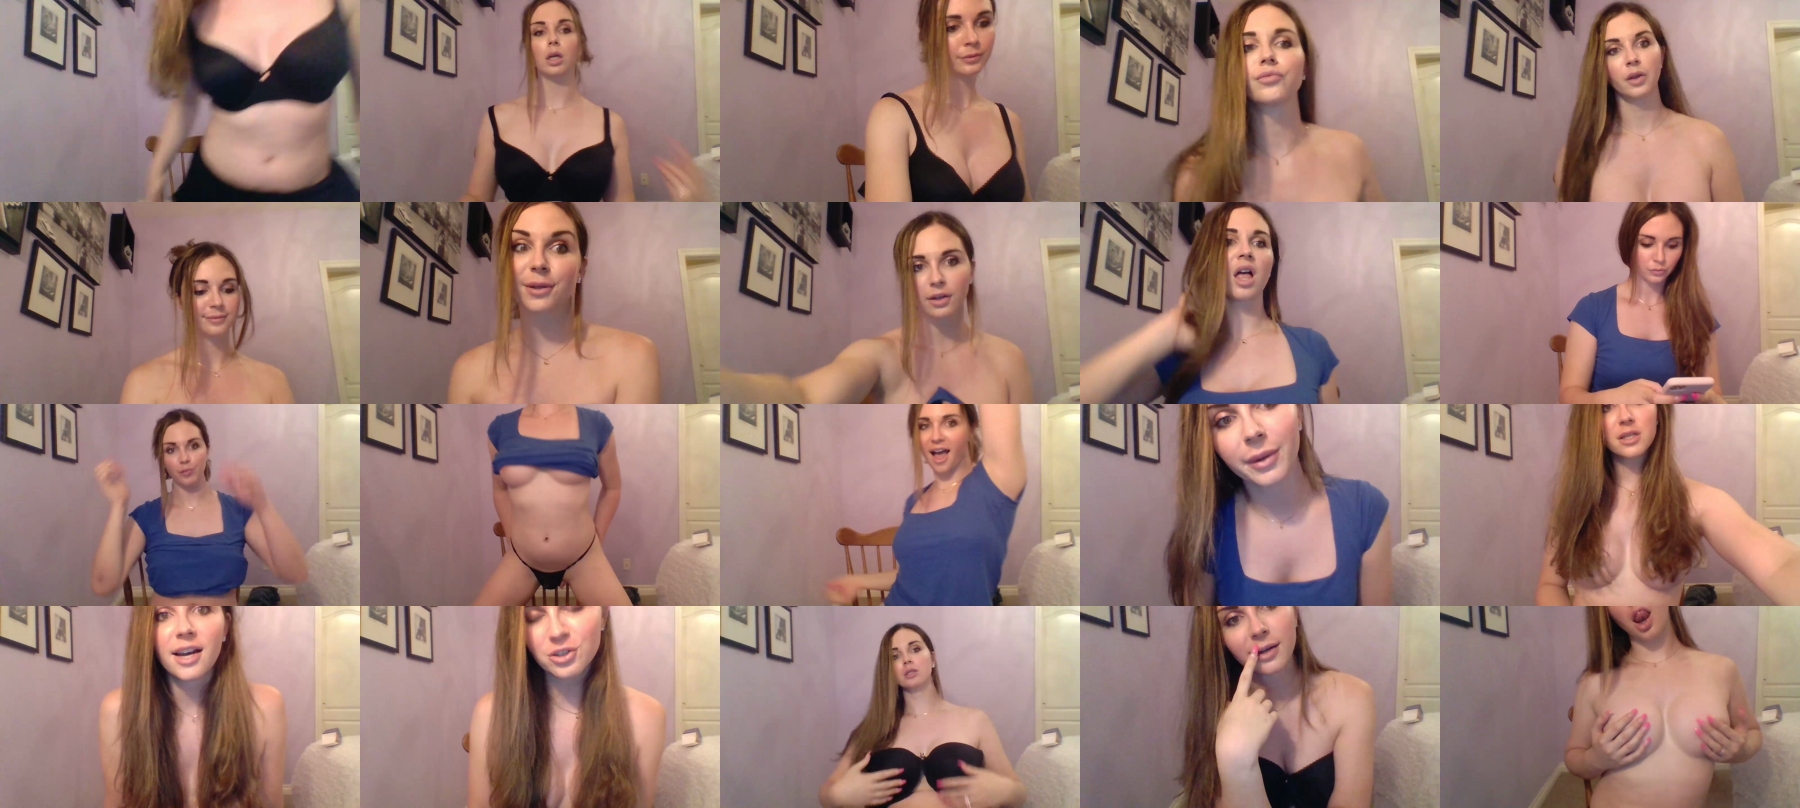 Daddystsprincess Naked CAM SHOW @ Chaturbate 07-07-2021